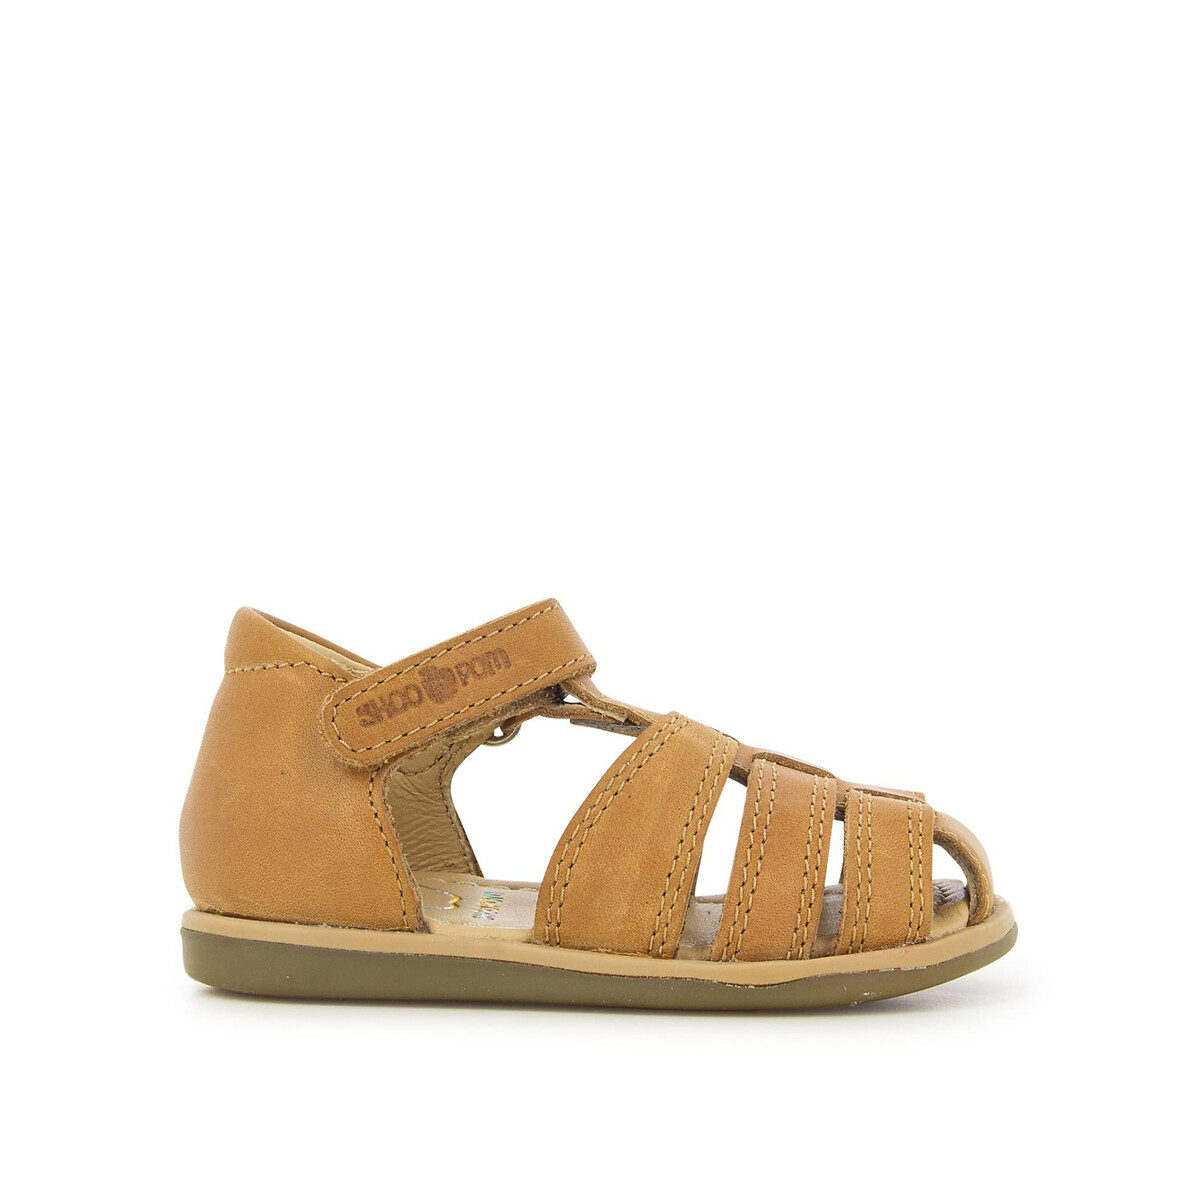 Kids Tity Tonton Sandals in Leather with Touch ’n’ Close Fastening